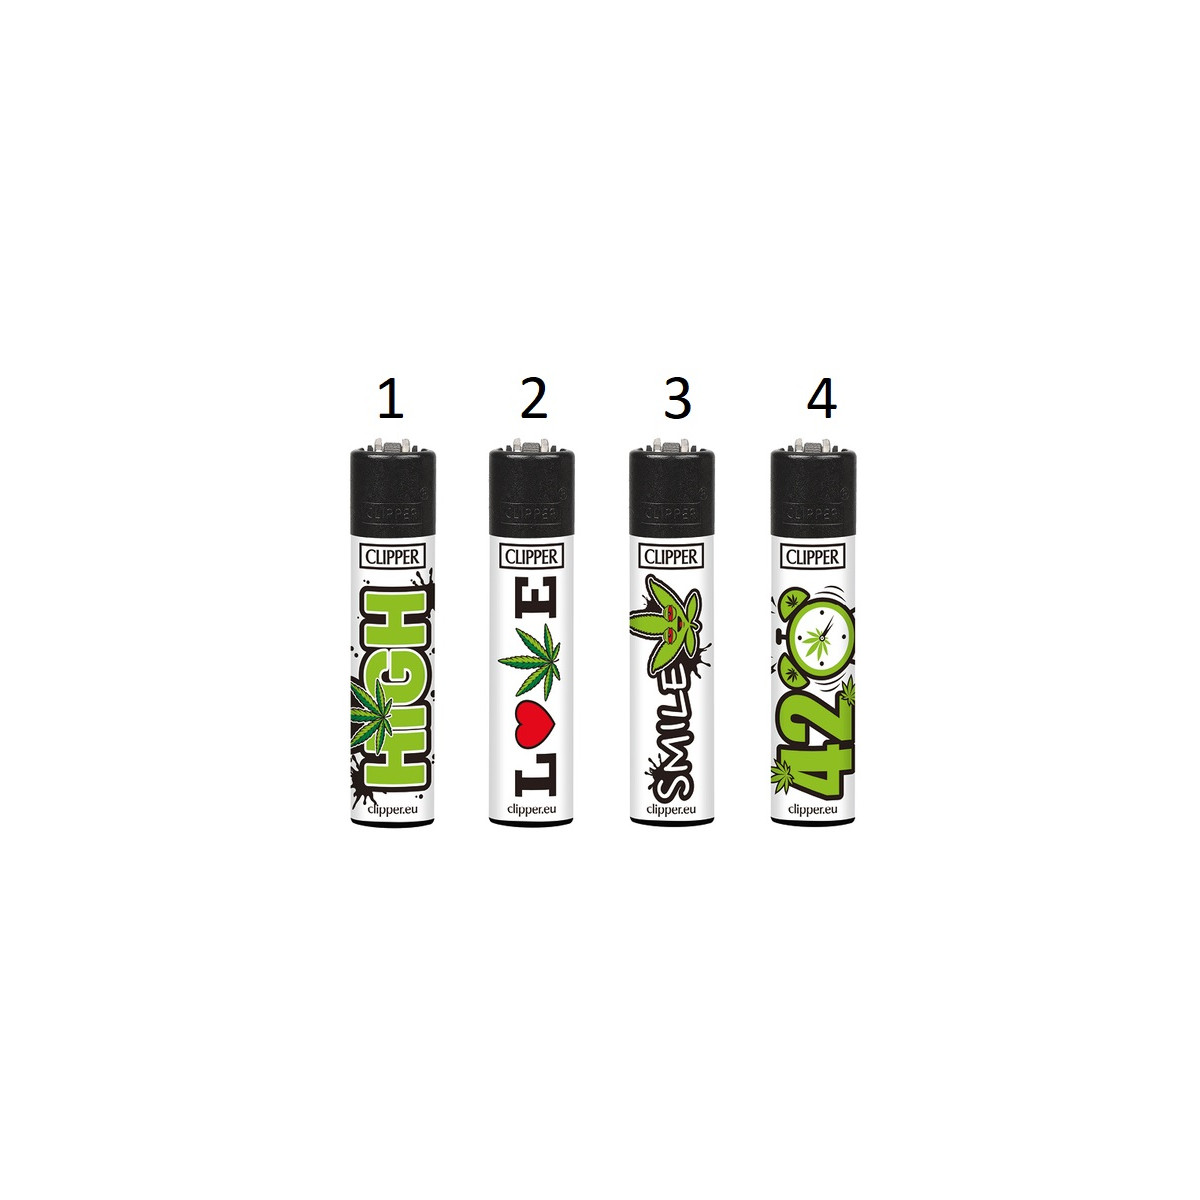 Clipper Classic Lighter Weed A